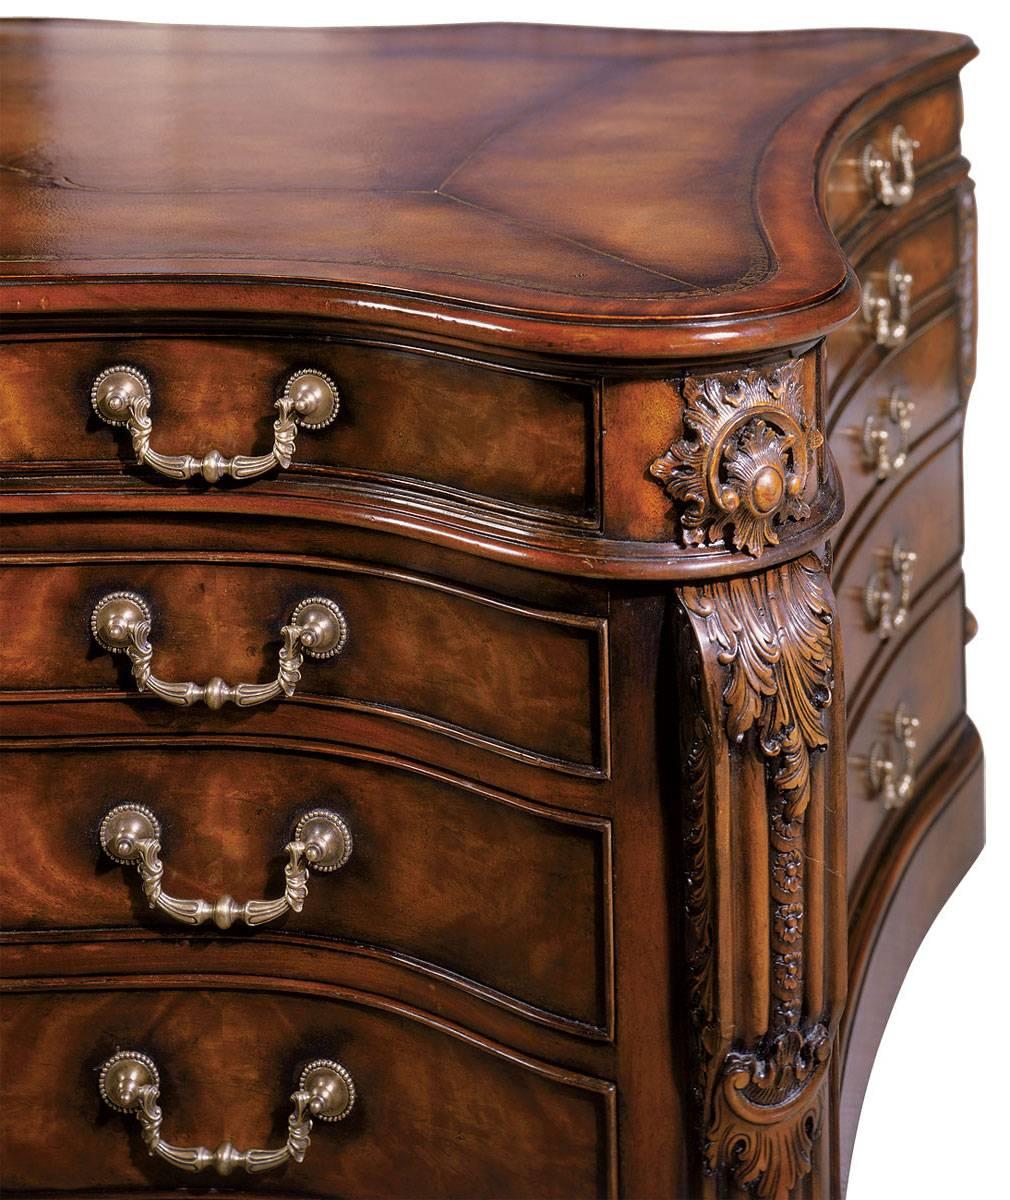 An extremely fine early George III style mahogany serpentine partner’s desk. The serpentine moulded edge top has a gilt-tooled faded brown leather inset writing surface fitted with three serpentine frieze drawers to one side and two slides and